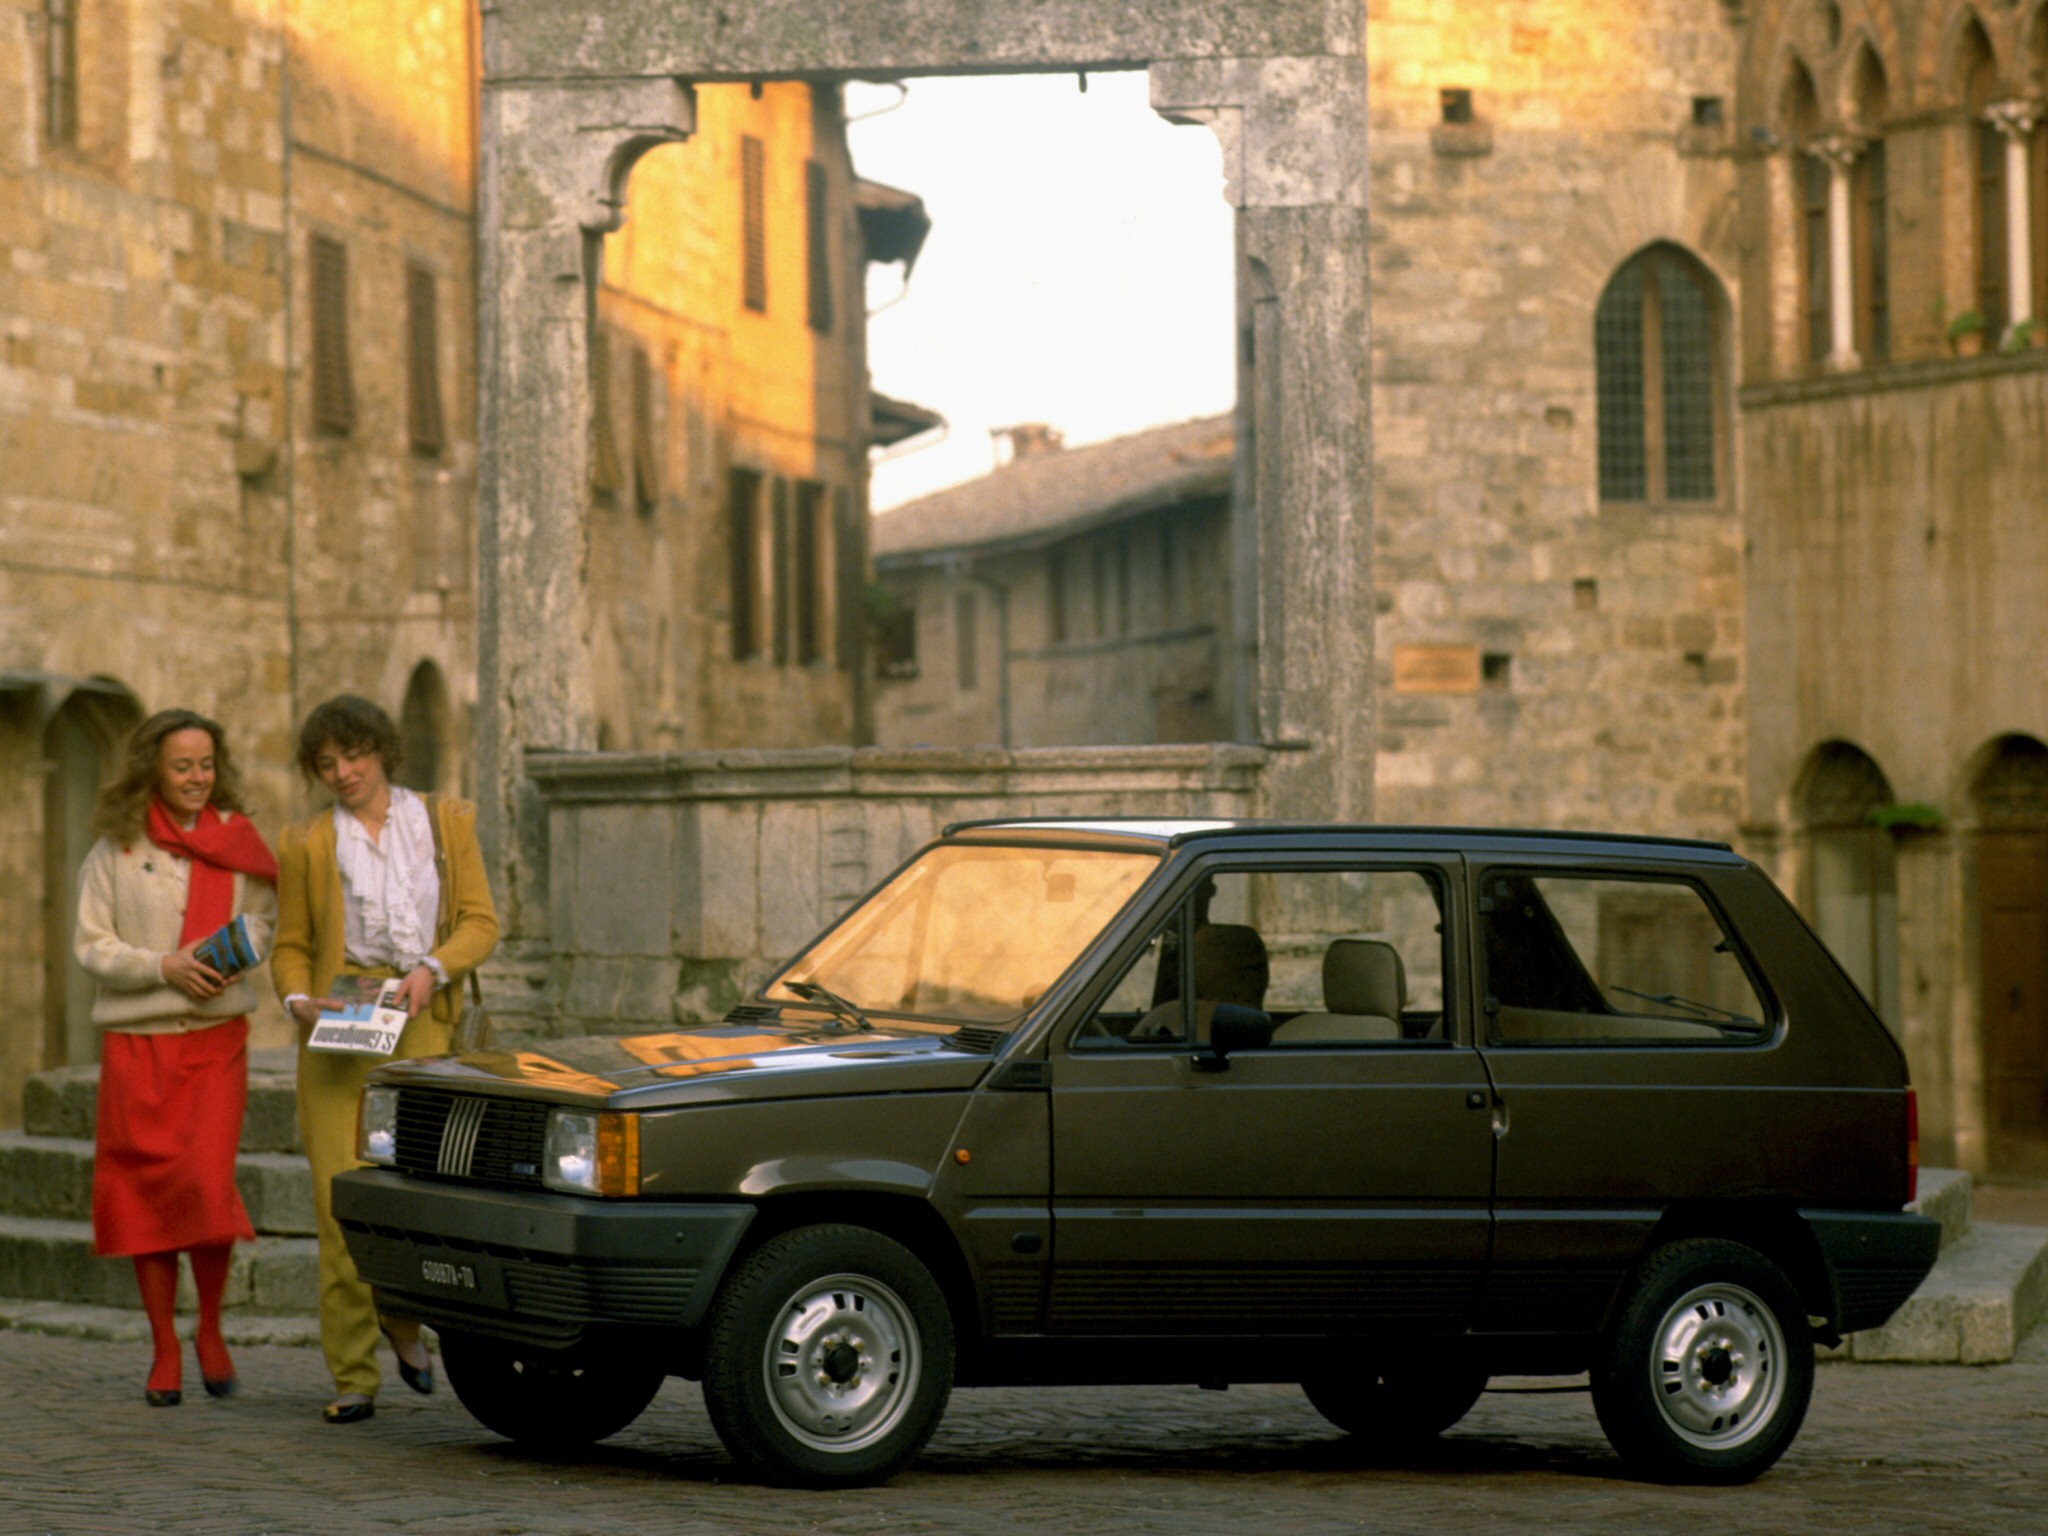 Car in pictures car photo gallery » Fiat Panda 1980 Photo 11